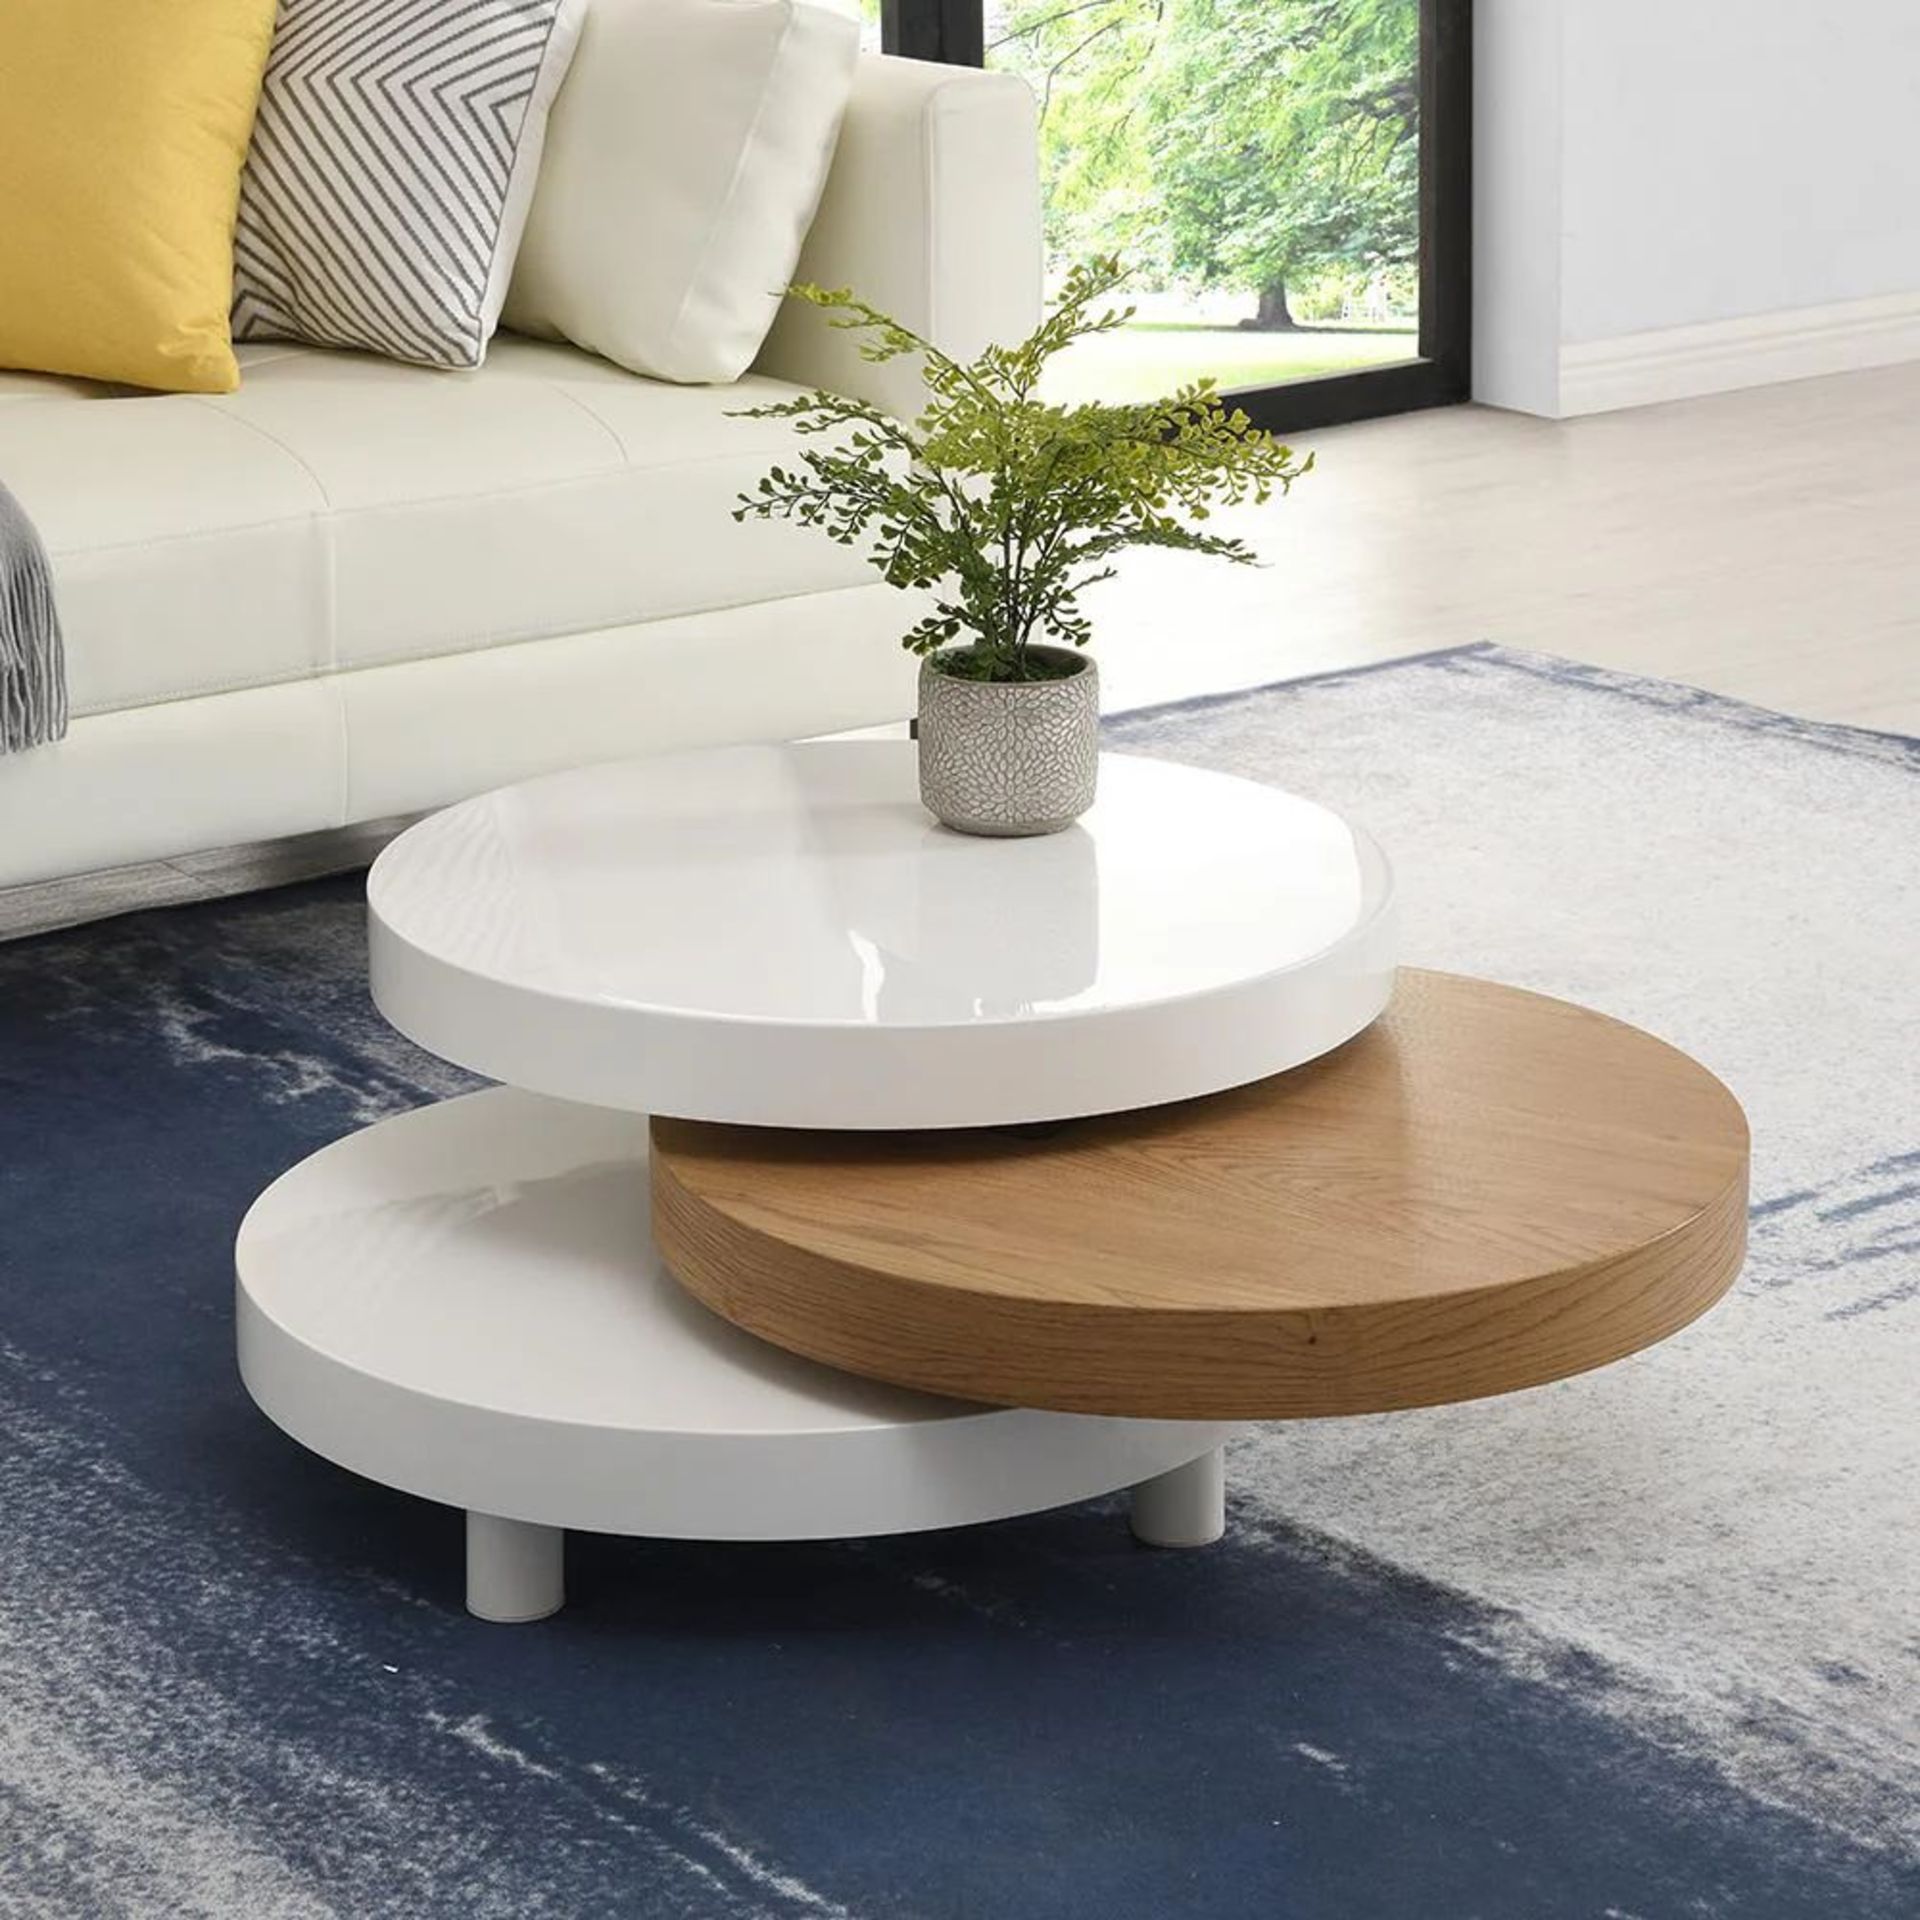 Gomboc 3 Tier High Gloss Rotating Coffee Table. - R13.6. RRP £239.99. Our lovely Gomboc coffee table - Bild 2 aus 2